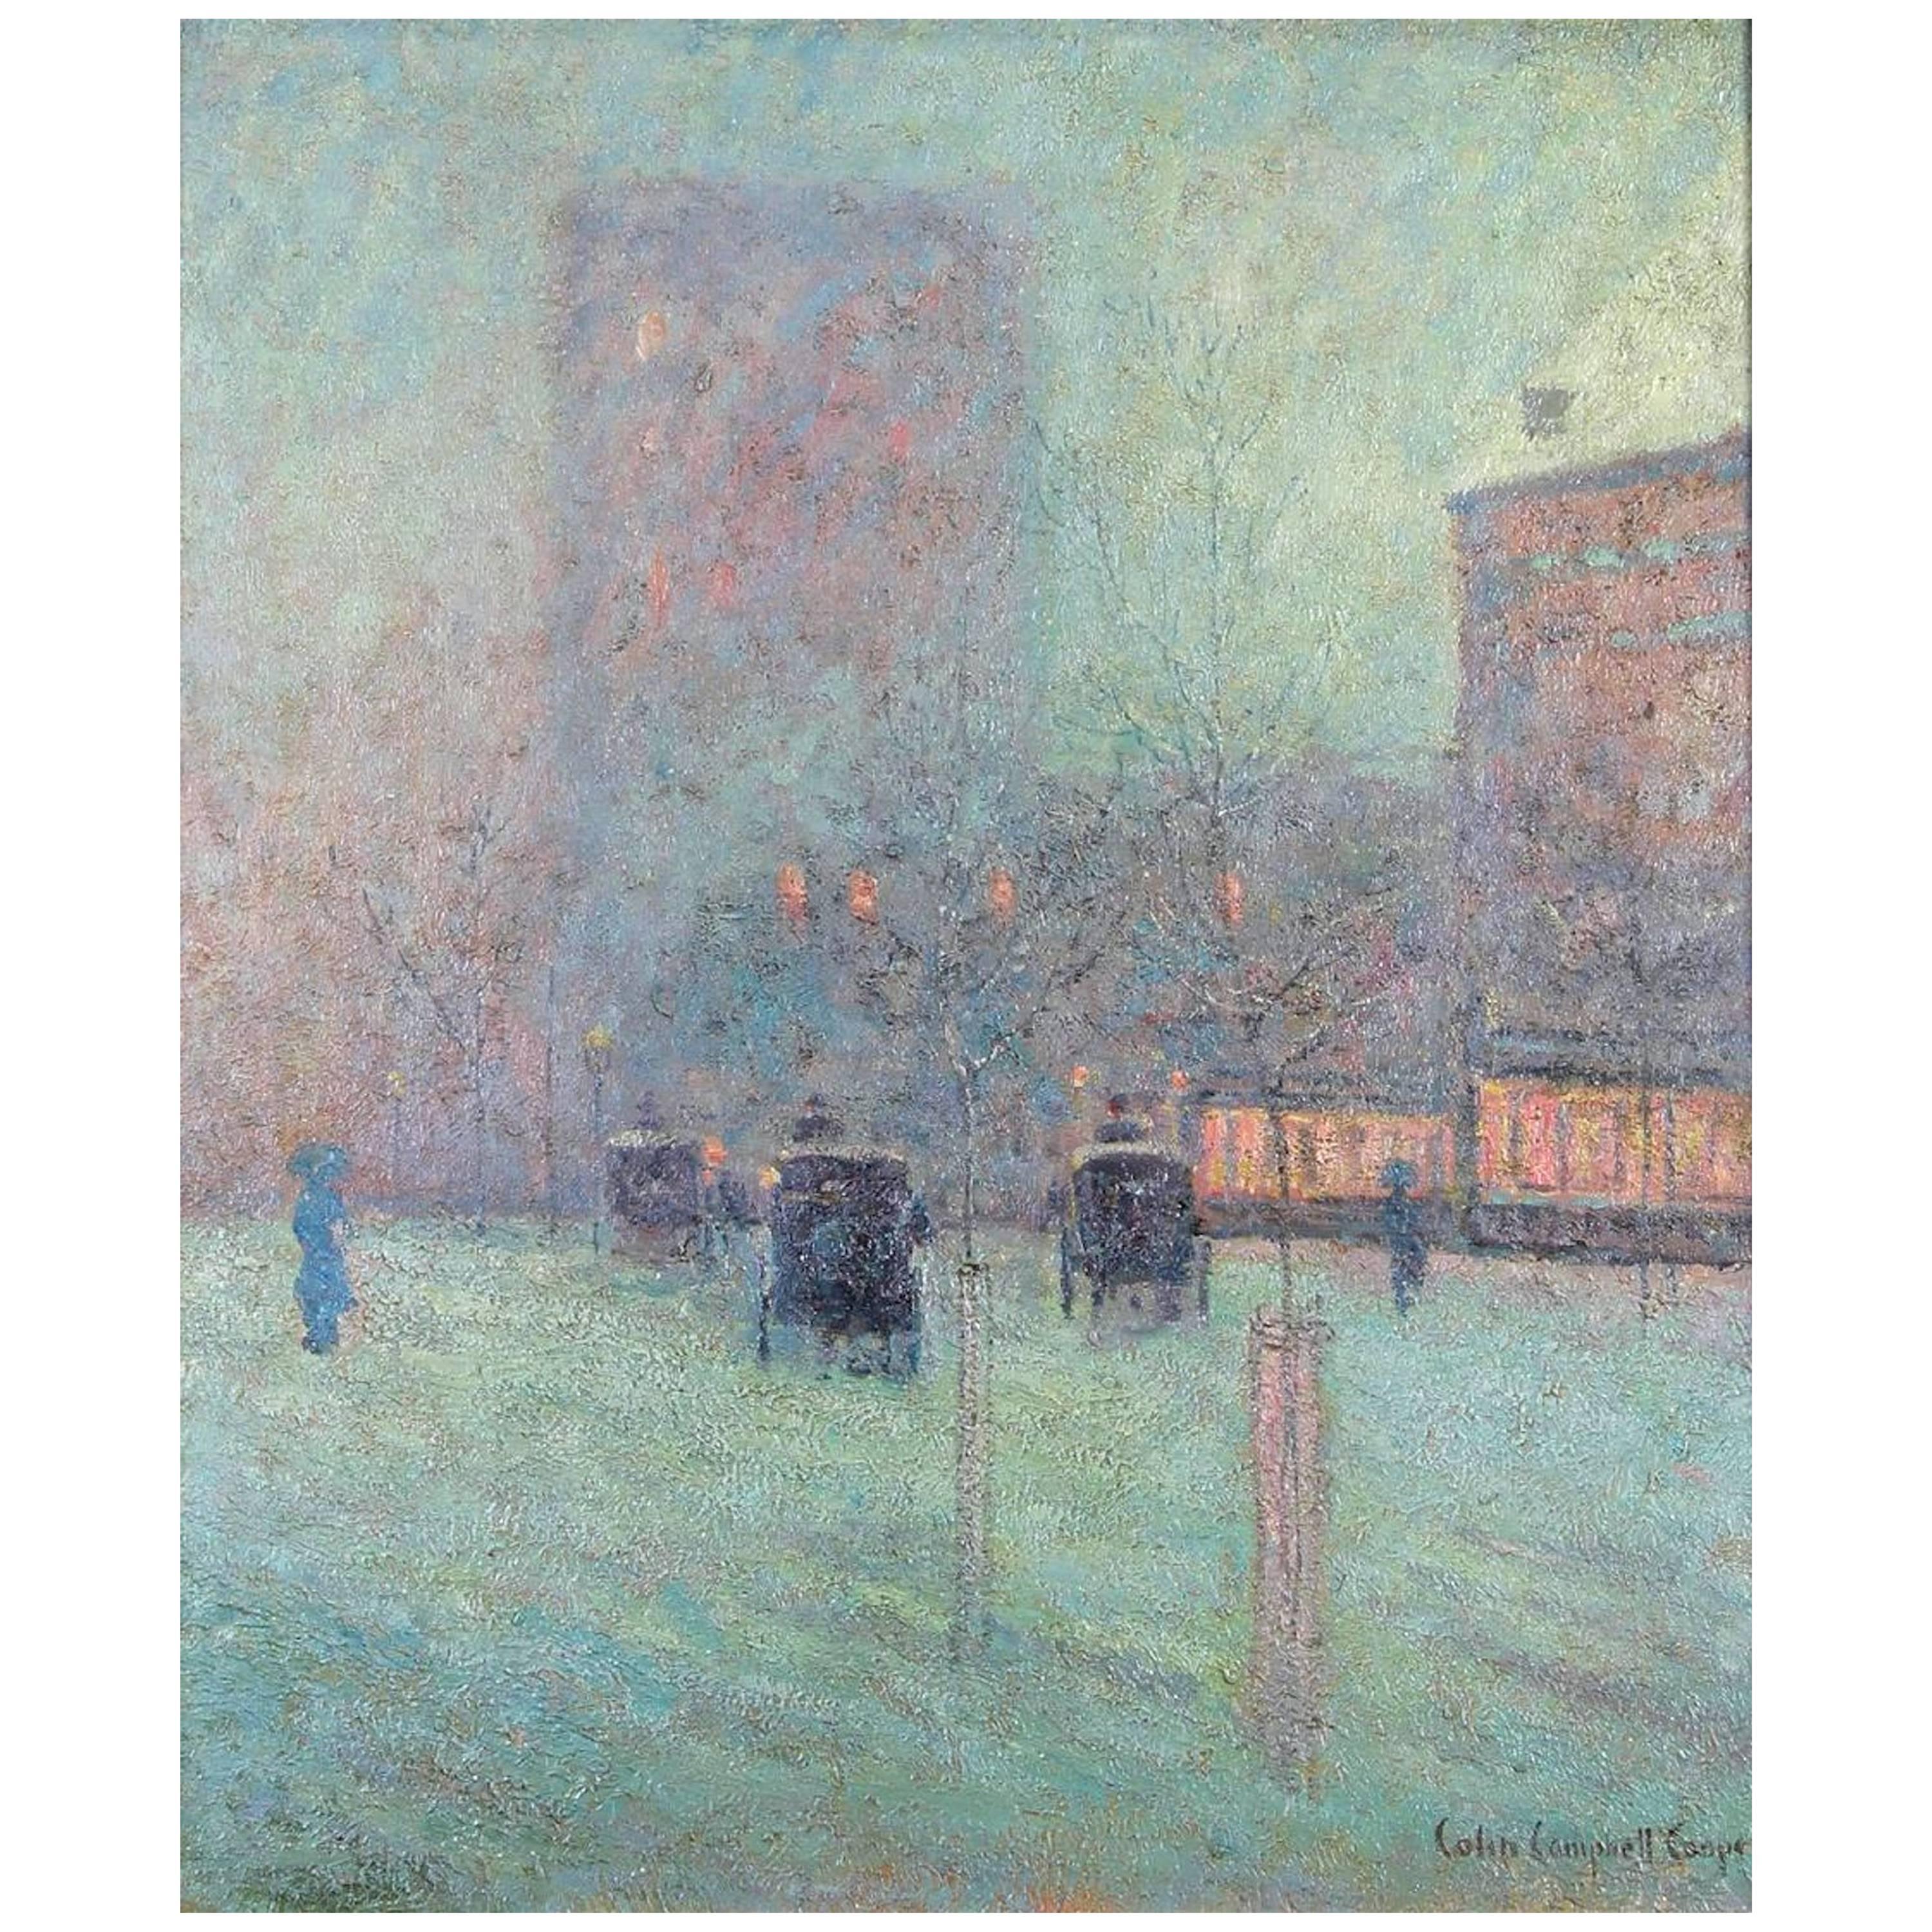 "Winter Glow, New York City" by Colin Campbell Cooper